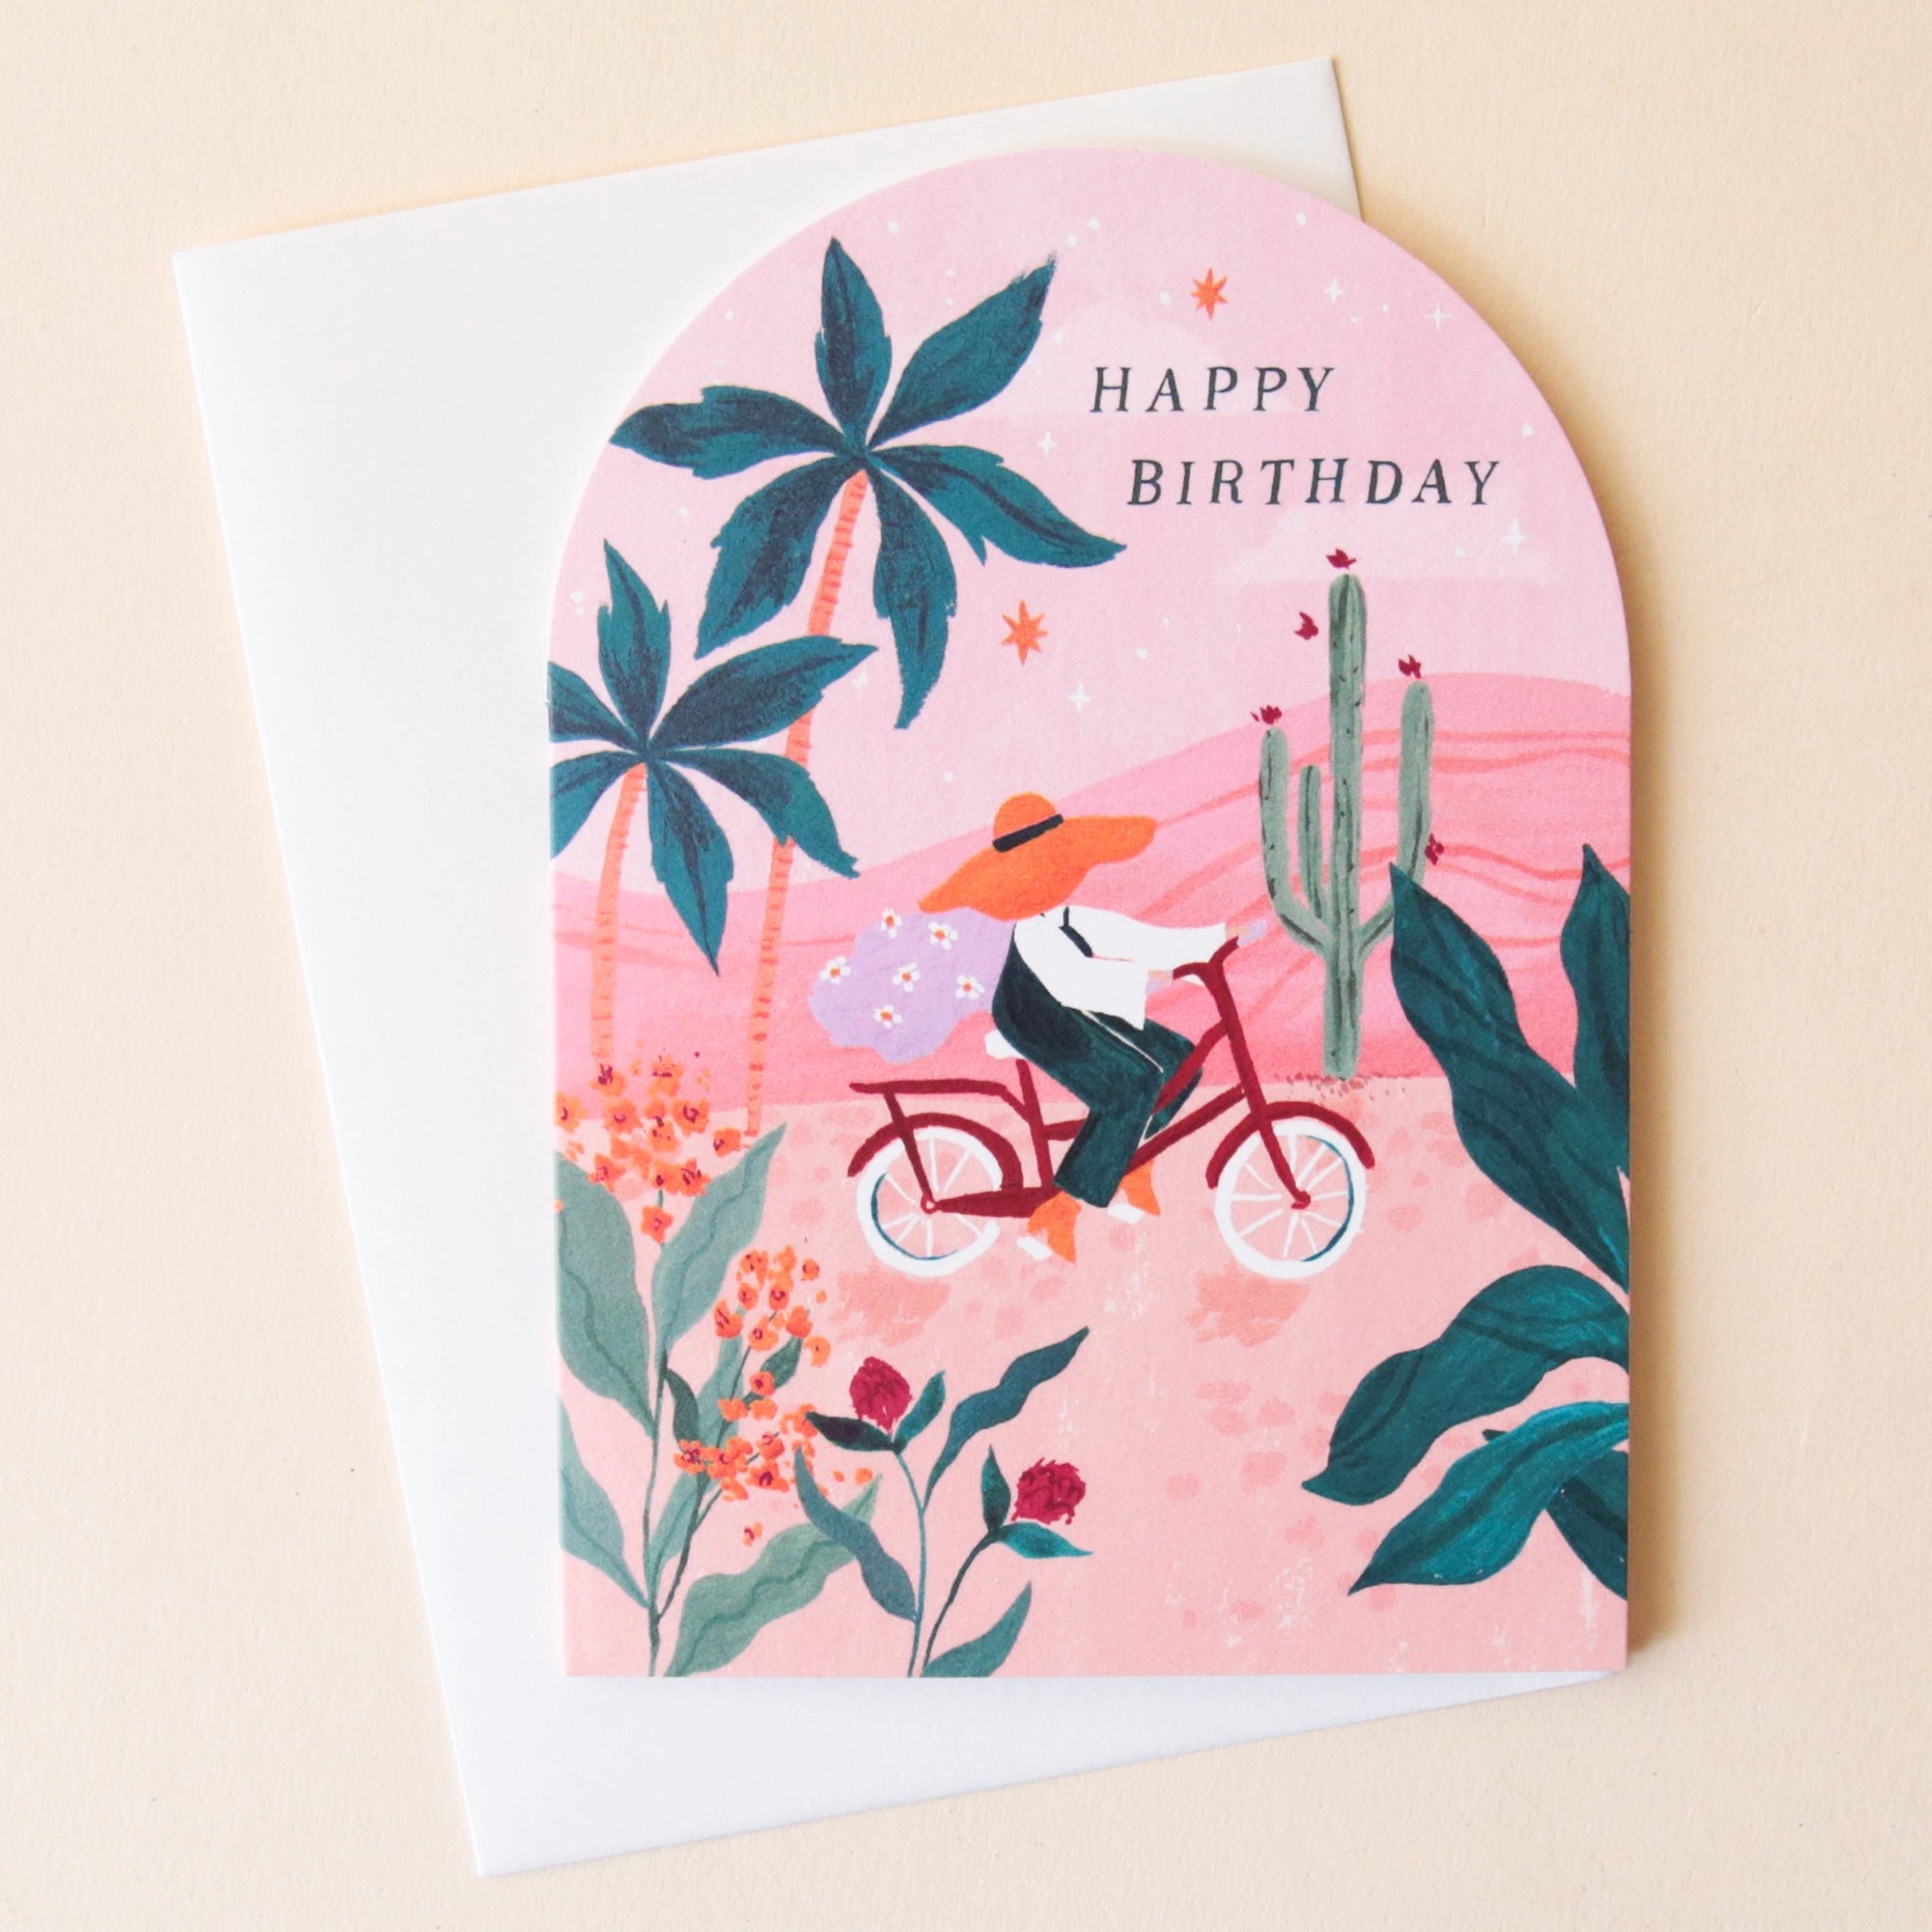 A pink arched greeting card with beautiful illustrations of palm trees, cacti and florals along with someone riding their red bicycle through the foliage along with text that reads, "Happy Birthday" in black letters.